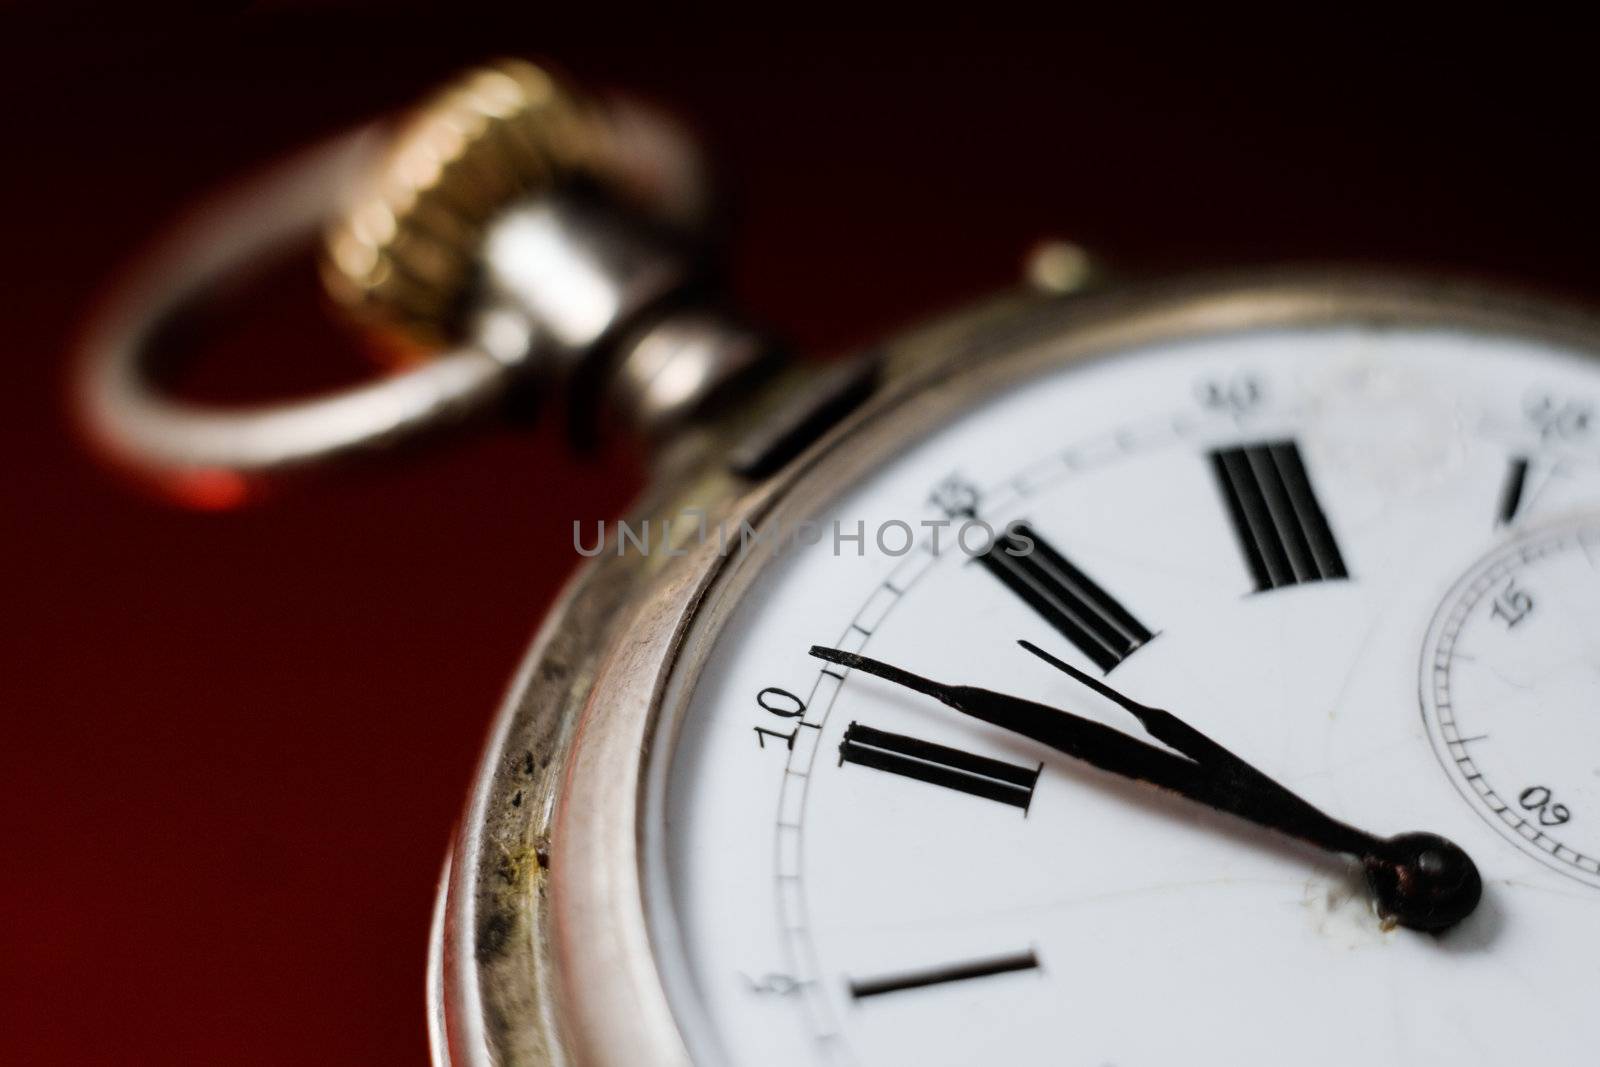 Clock face antique old silver pocket watches on a red background, photo for yours design, postcard, album, cover, scrapbook, etc.